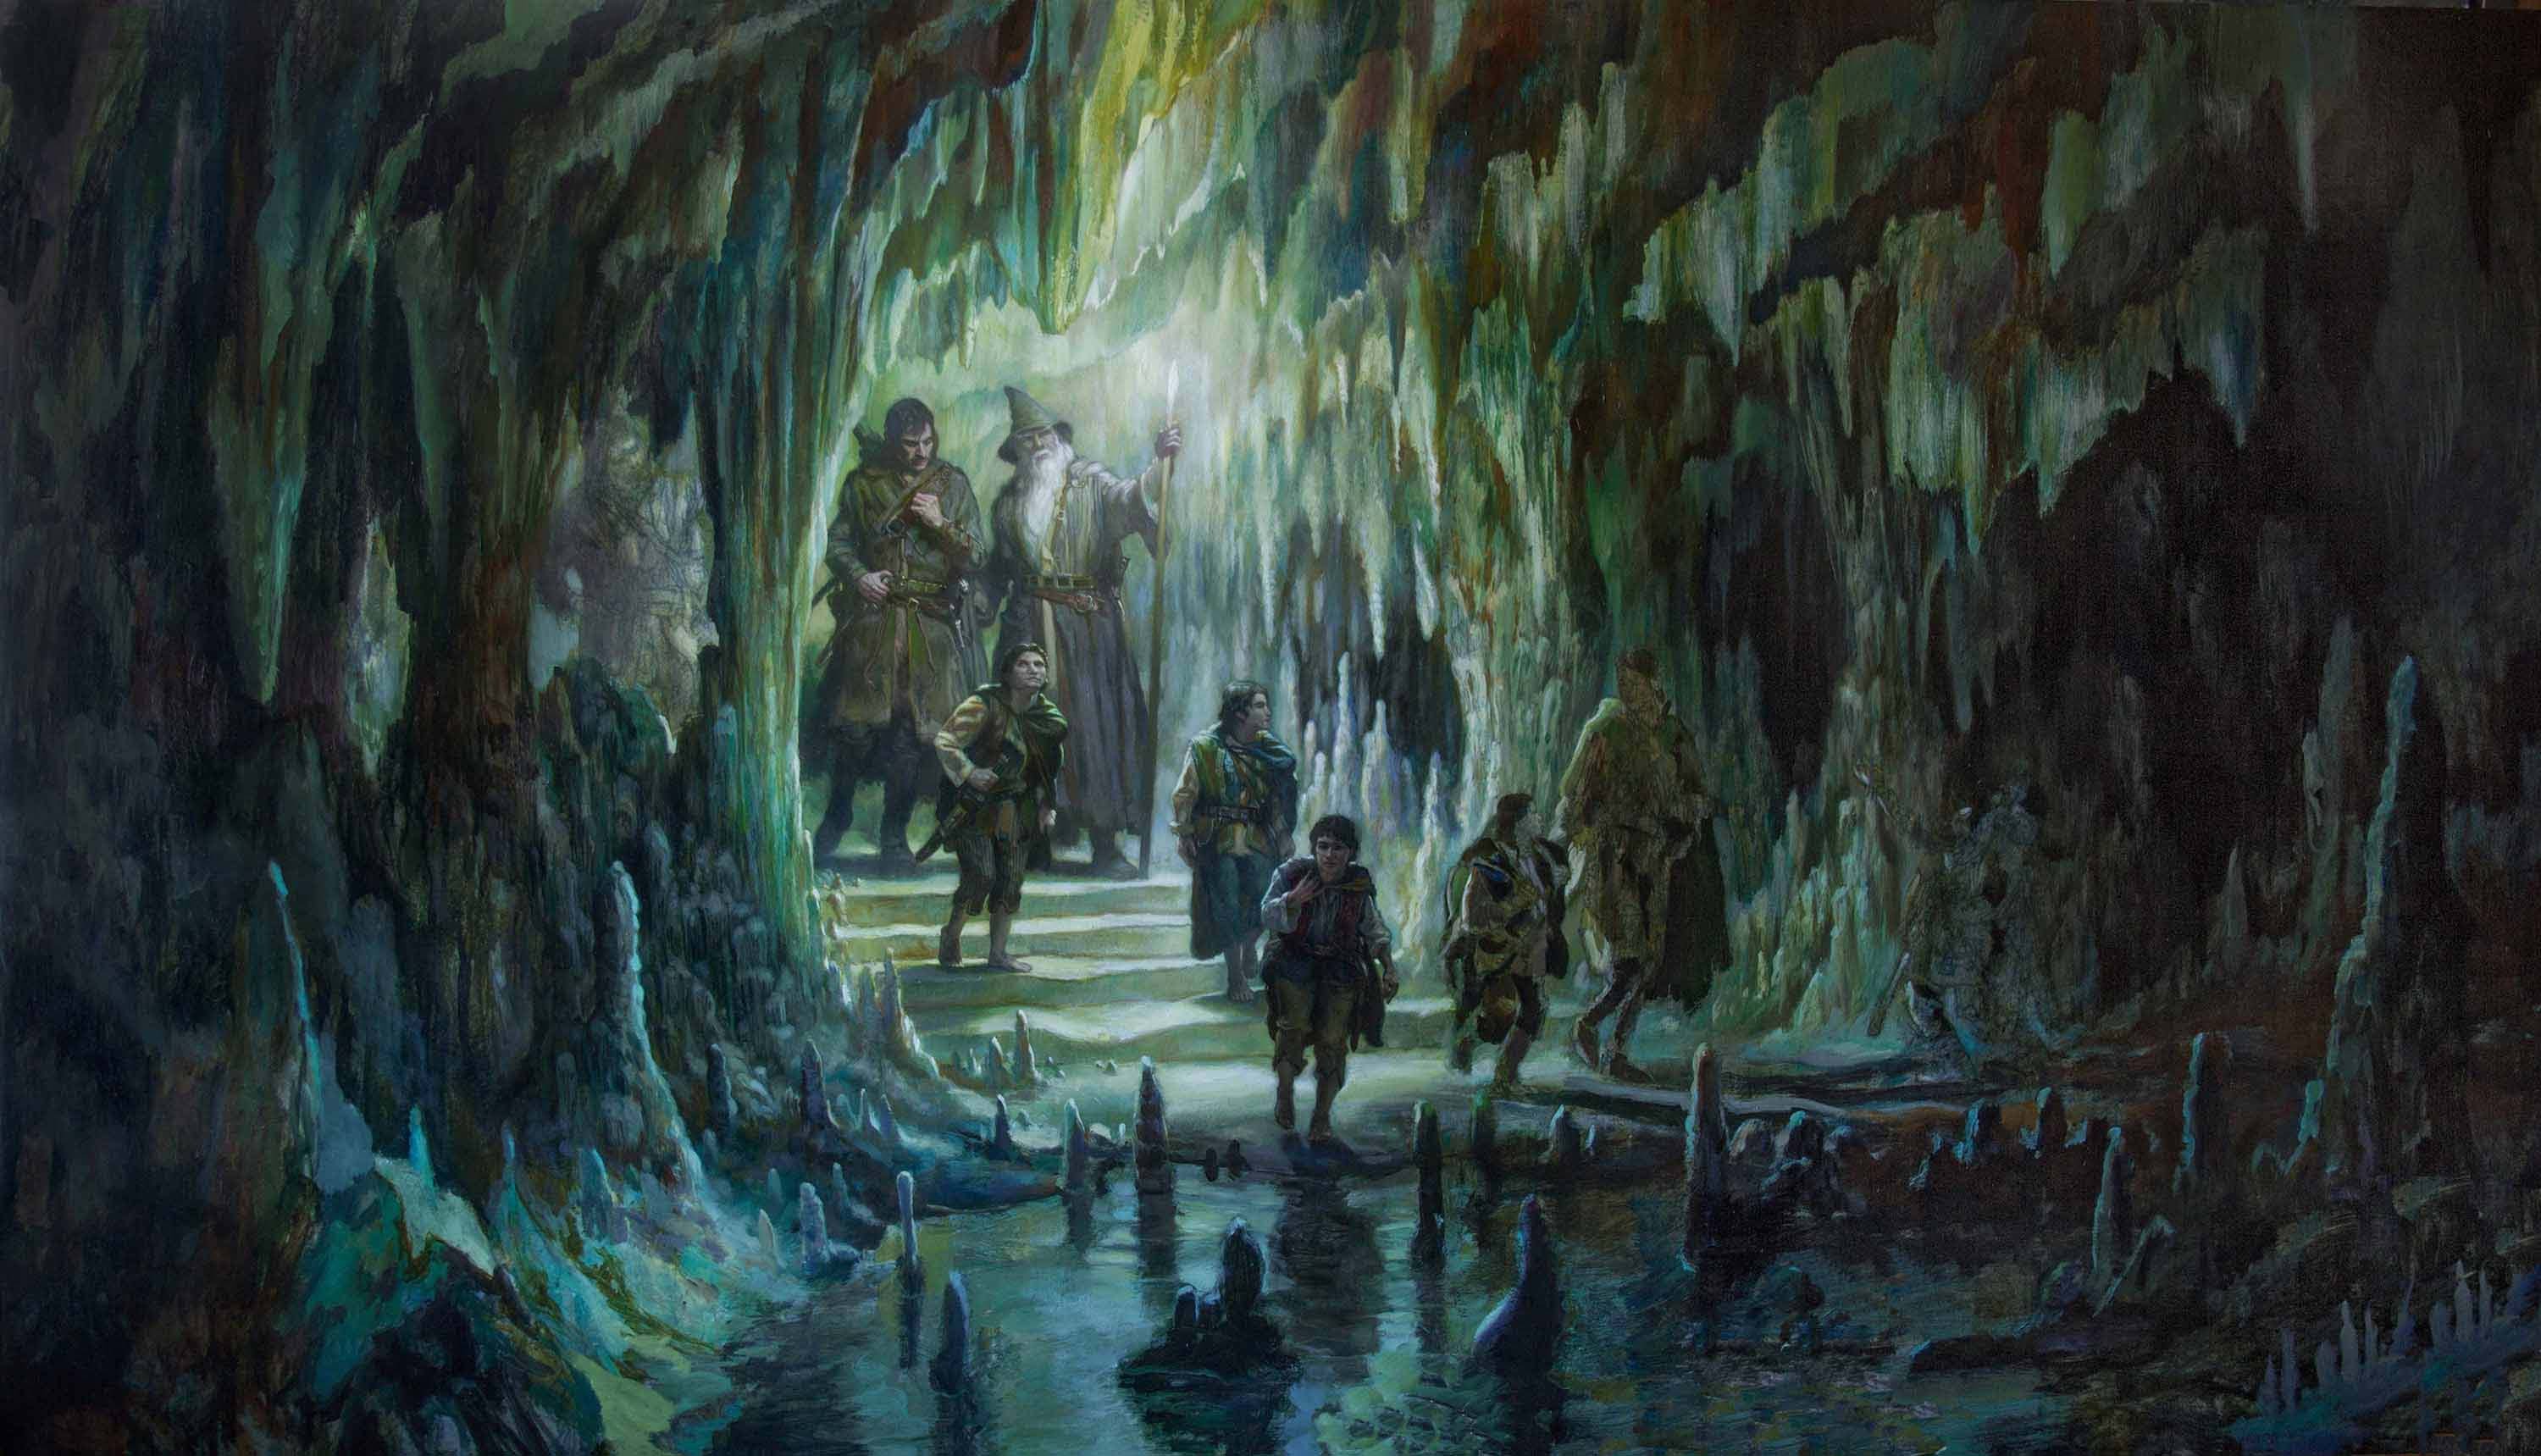 The Fellowship of the Ring in Moria
44" x 78"  Oil on Panel  2016
collection of François Mainard
